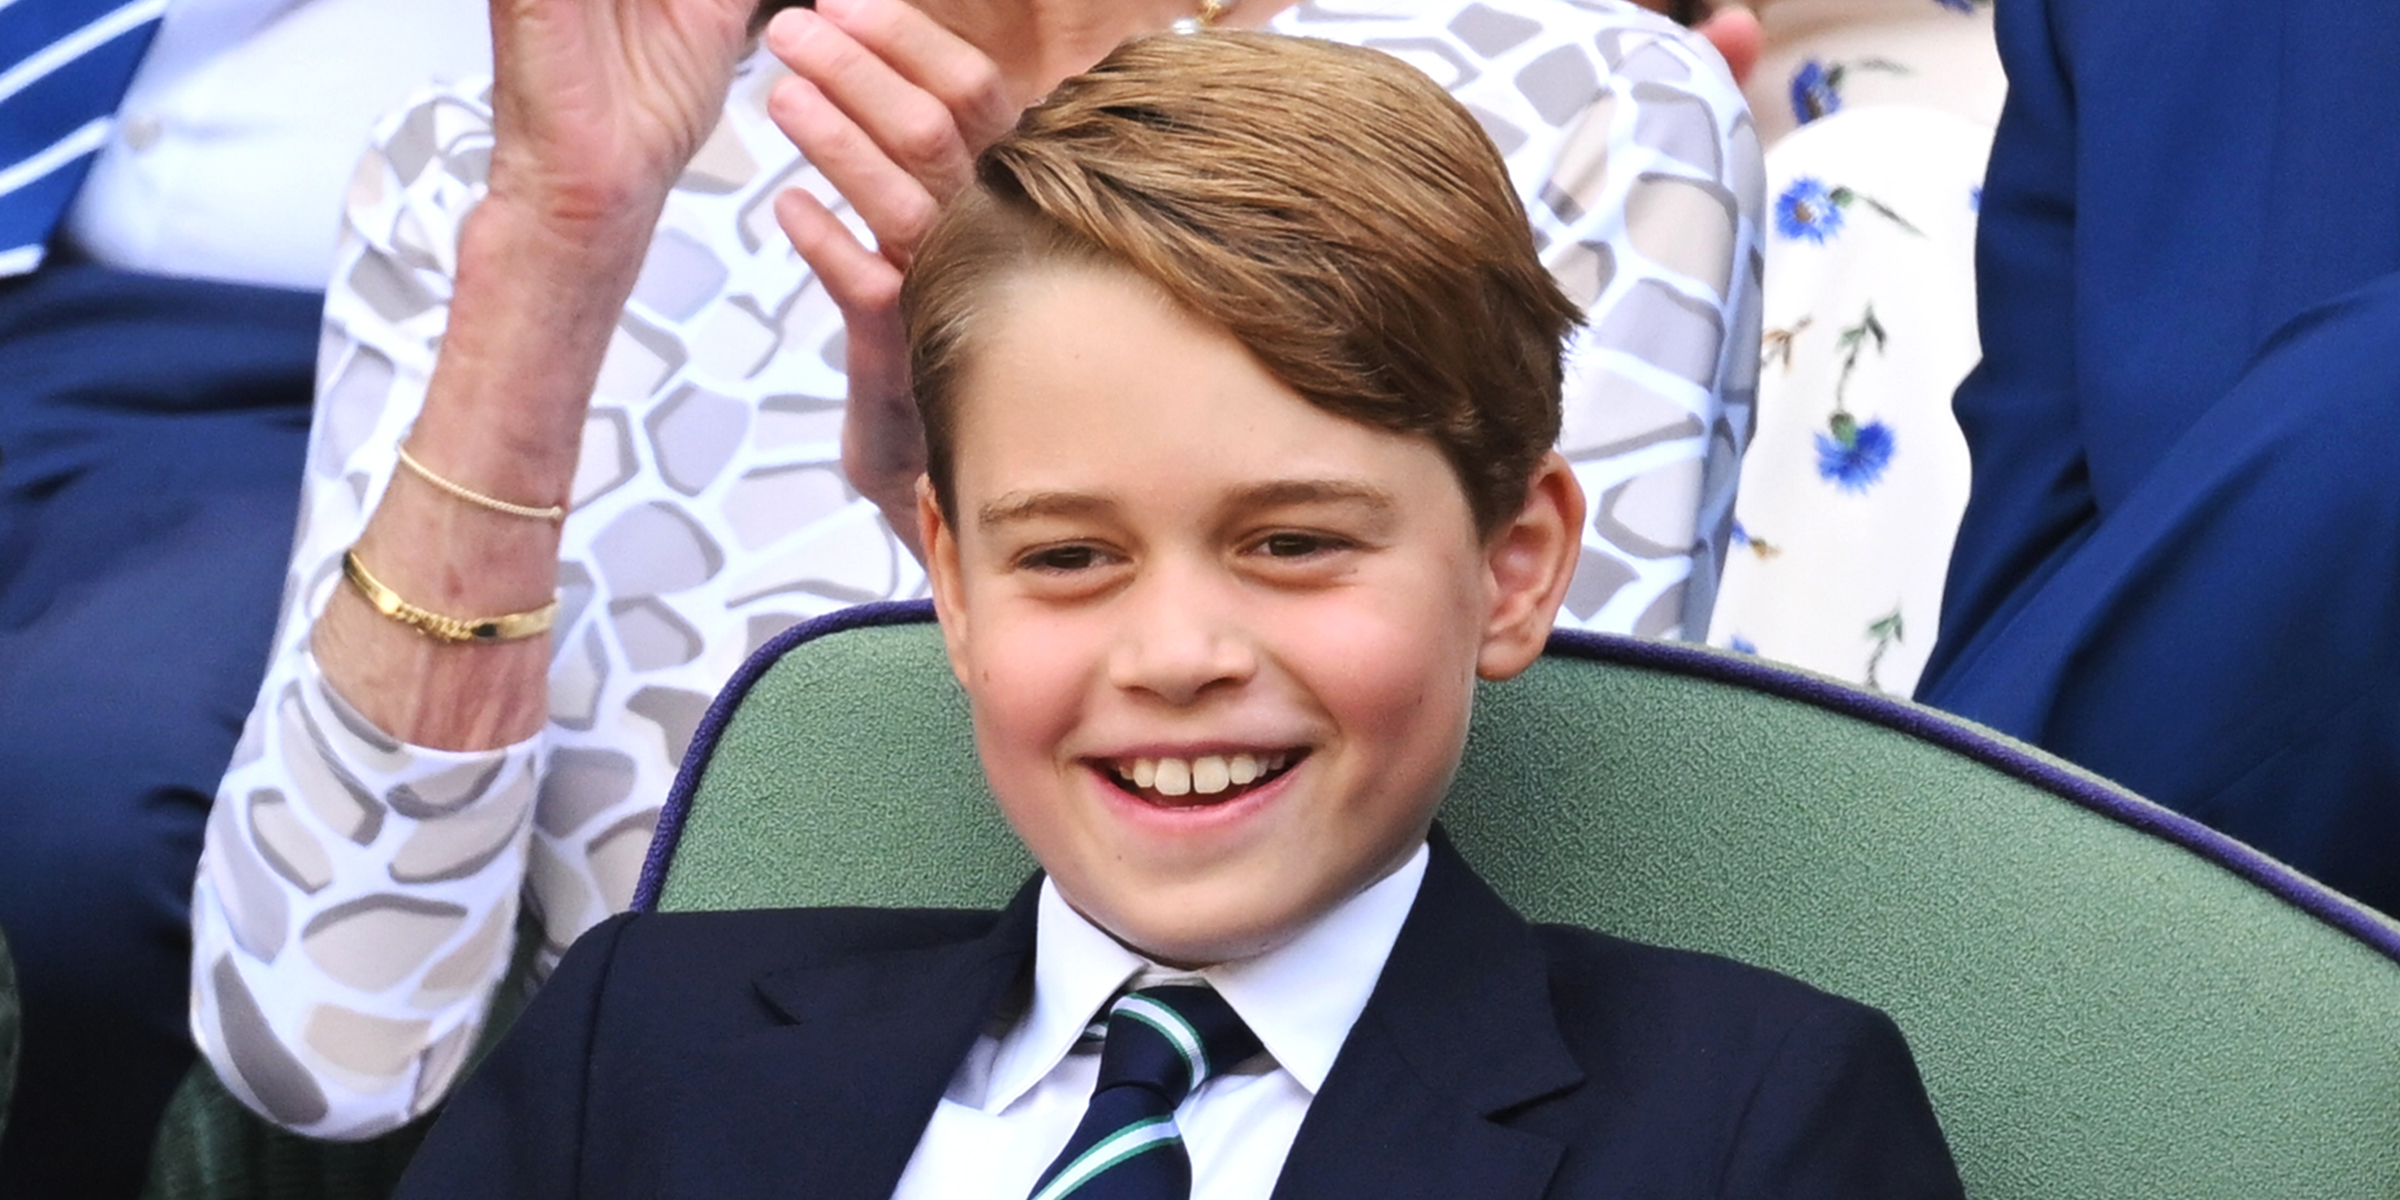 Prince George | Source: Getty Images